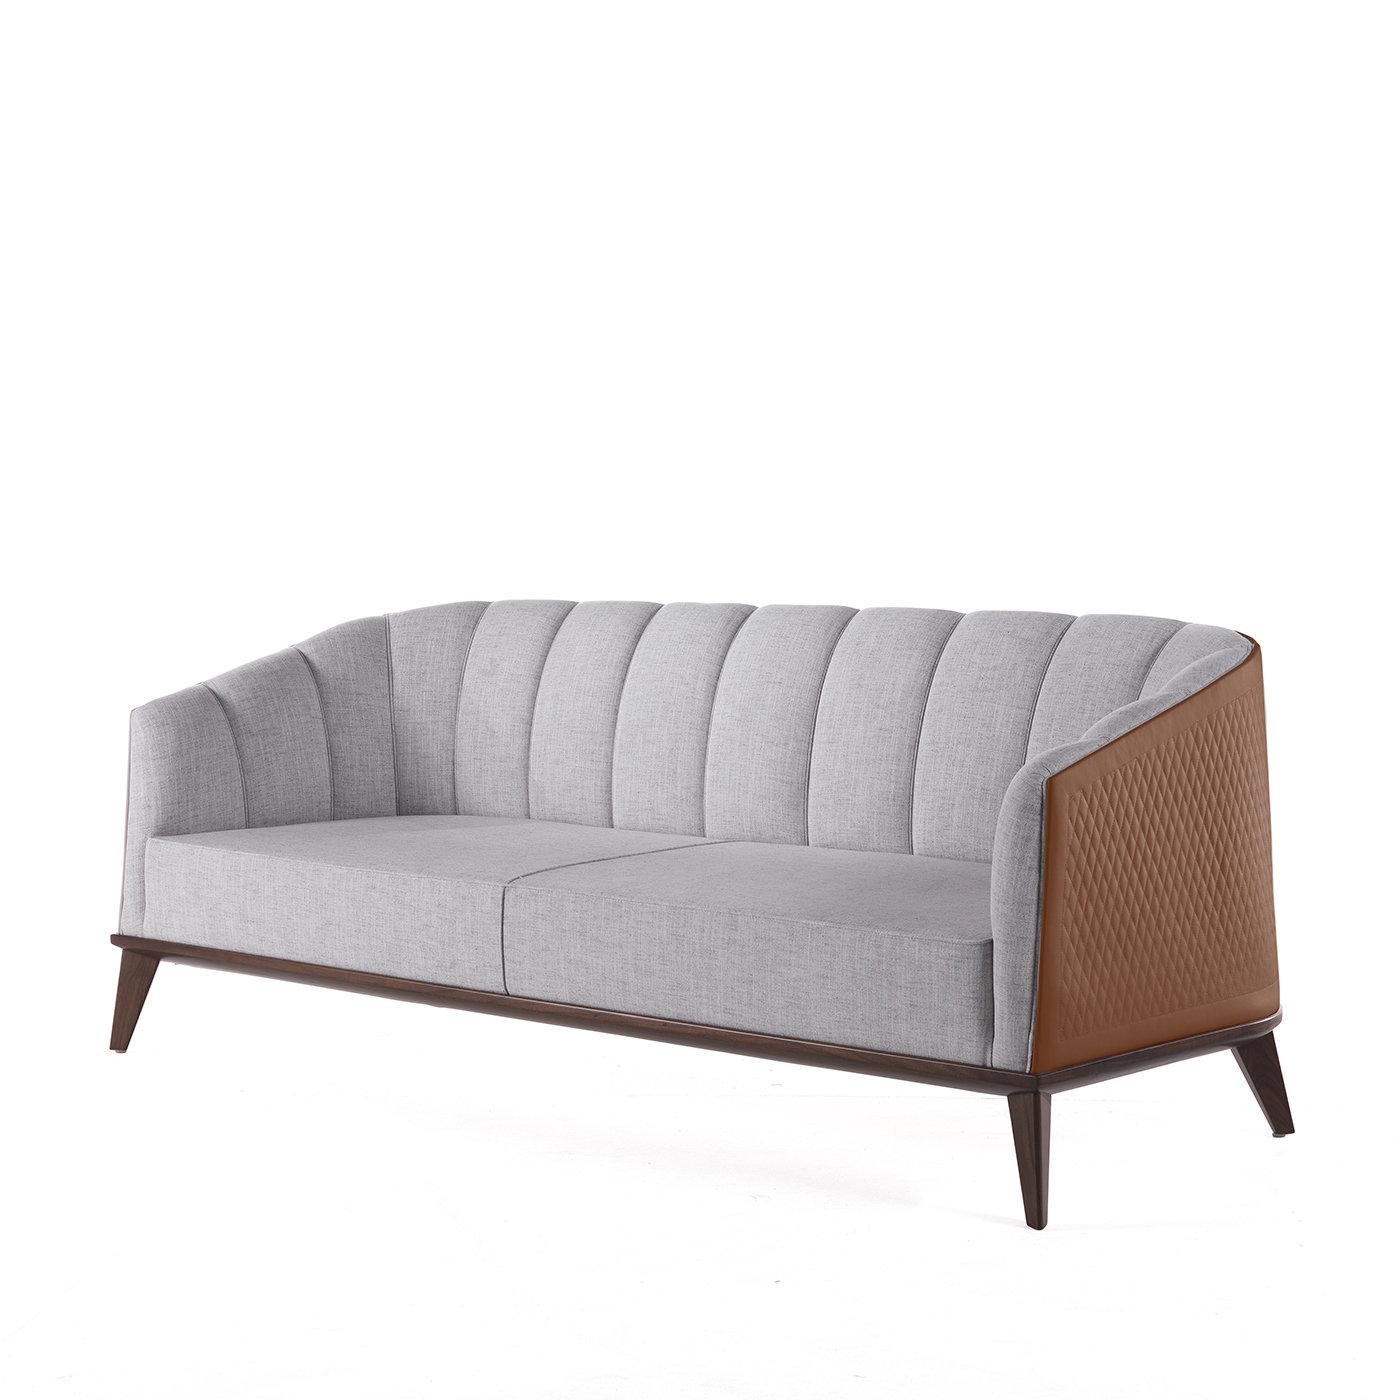 The Roy Sofa showcases gentle curves and a plush silhouette entirely upholstered in an elegant heather gray fabric. The wraparound back and sloping arms, detailed with wide, vertical channels, form a shape that perfectly encompasses both comfort and